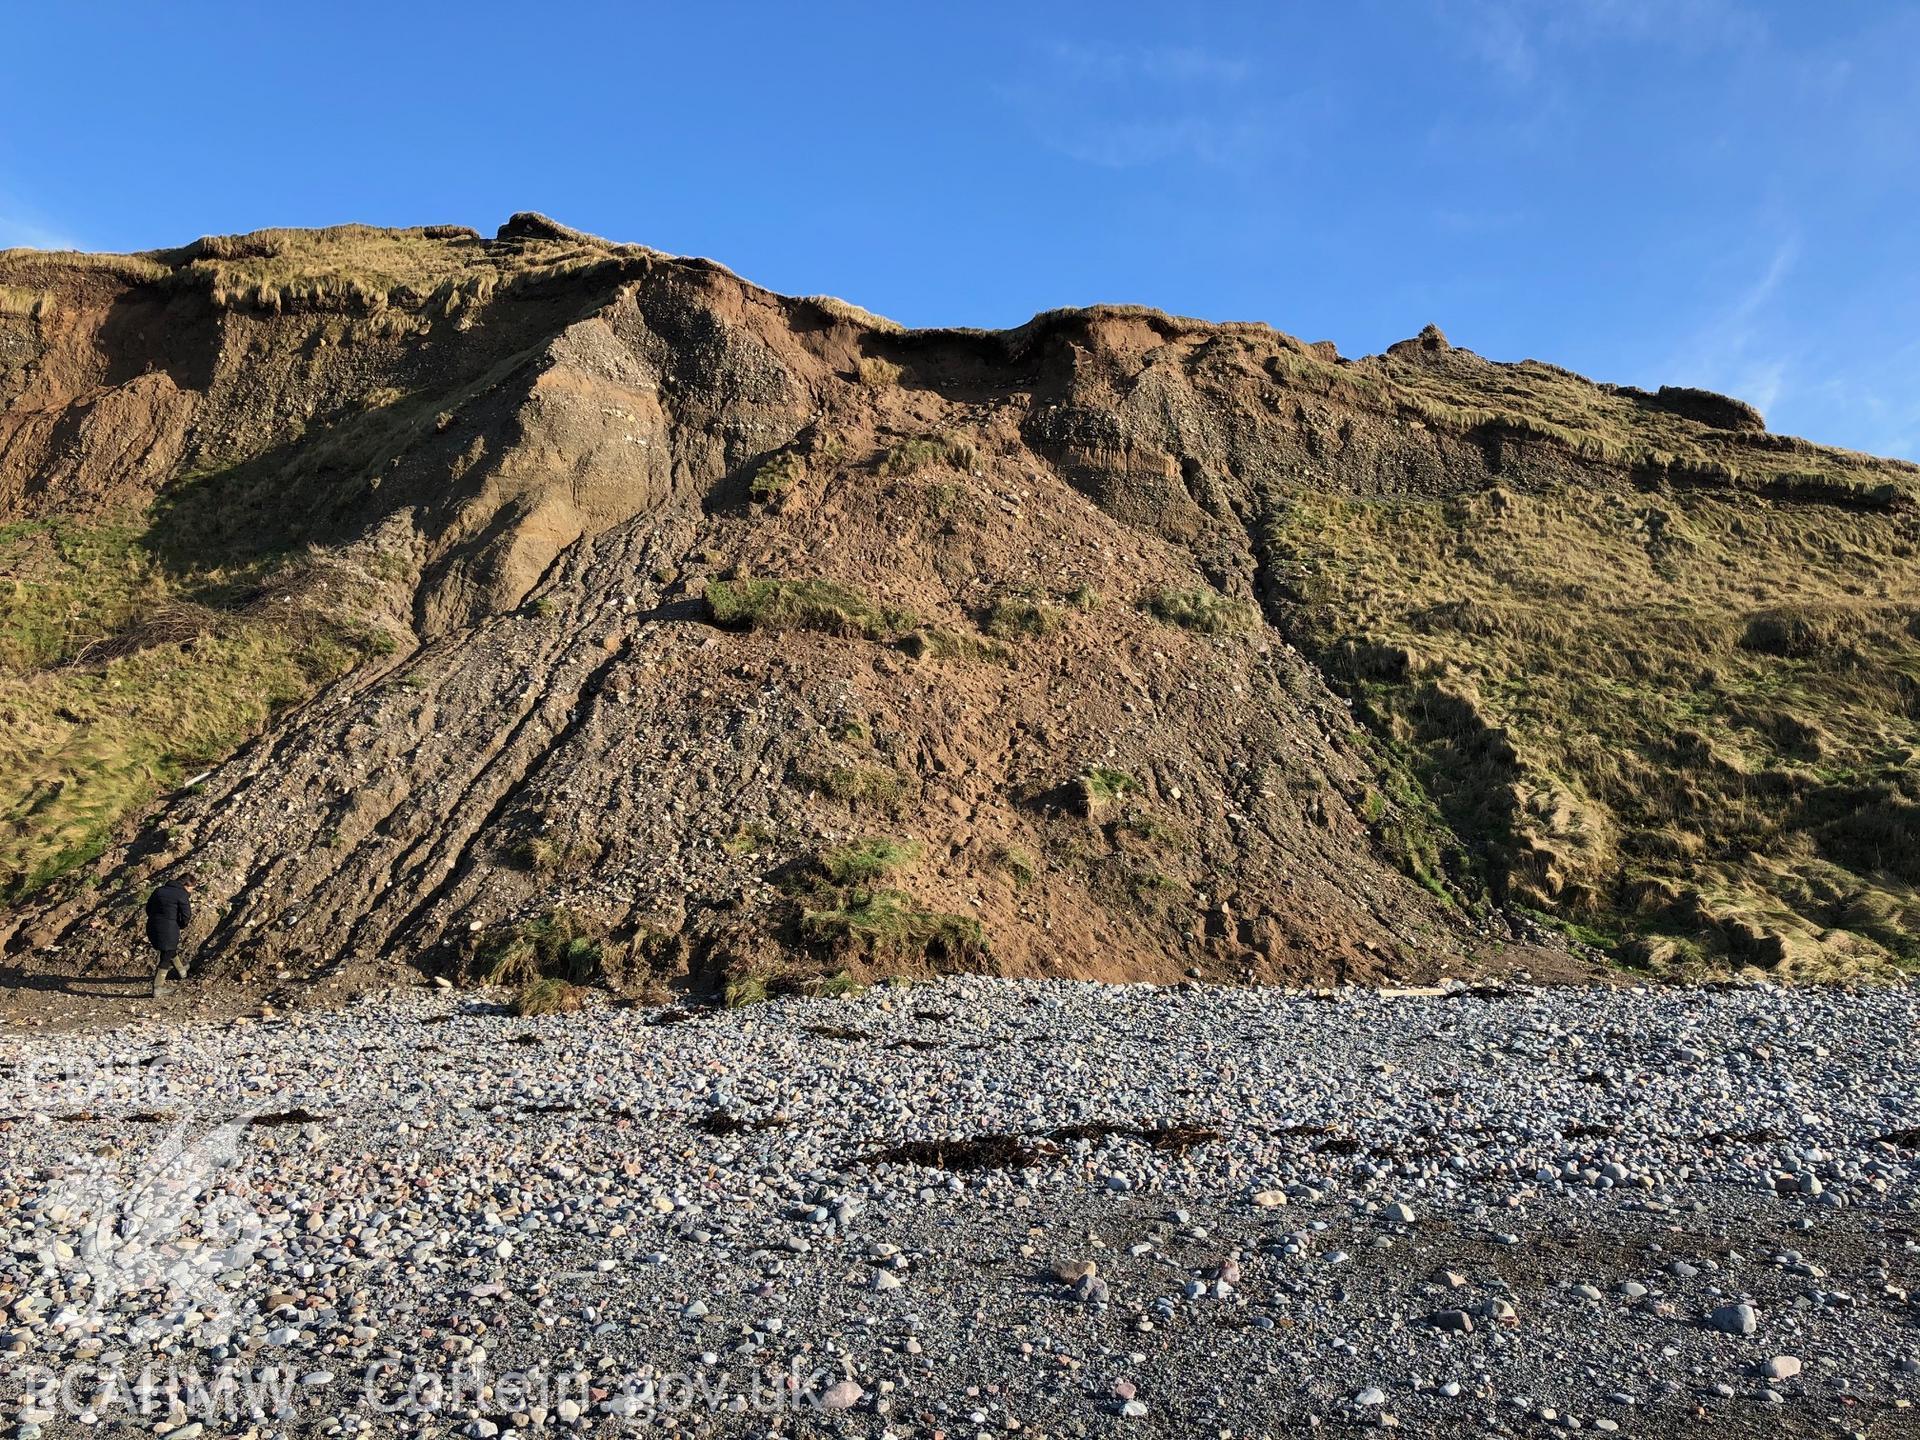 Wide shot of eroding edge showing slipped sediment. Taken by Toby Driver. Produced with EU funds through the Ireland Wales Co-operation Programme 2014-2023. All material made freely available through the Open Government Licence.